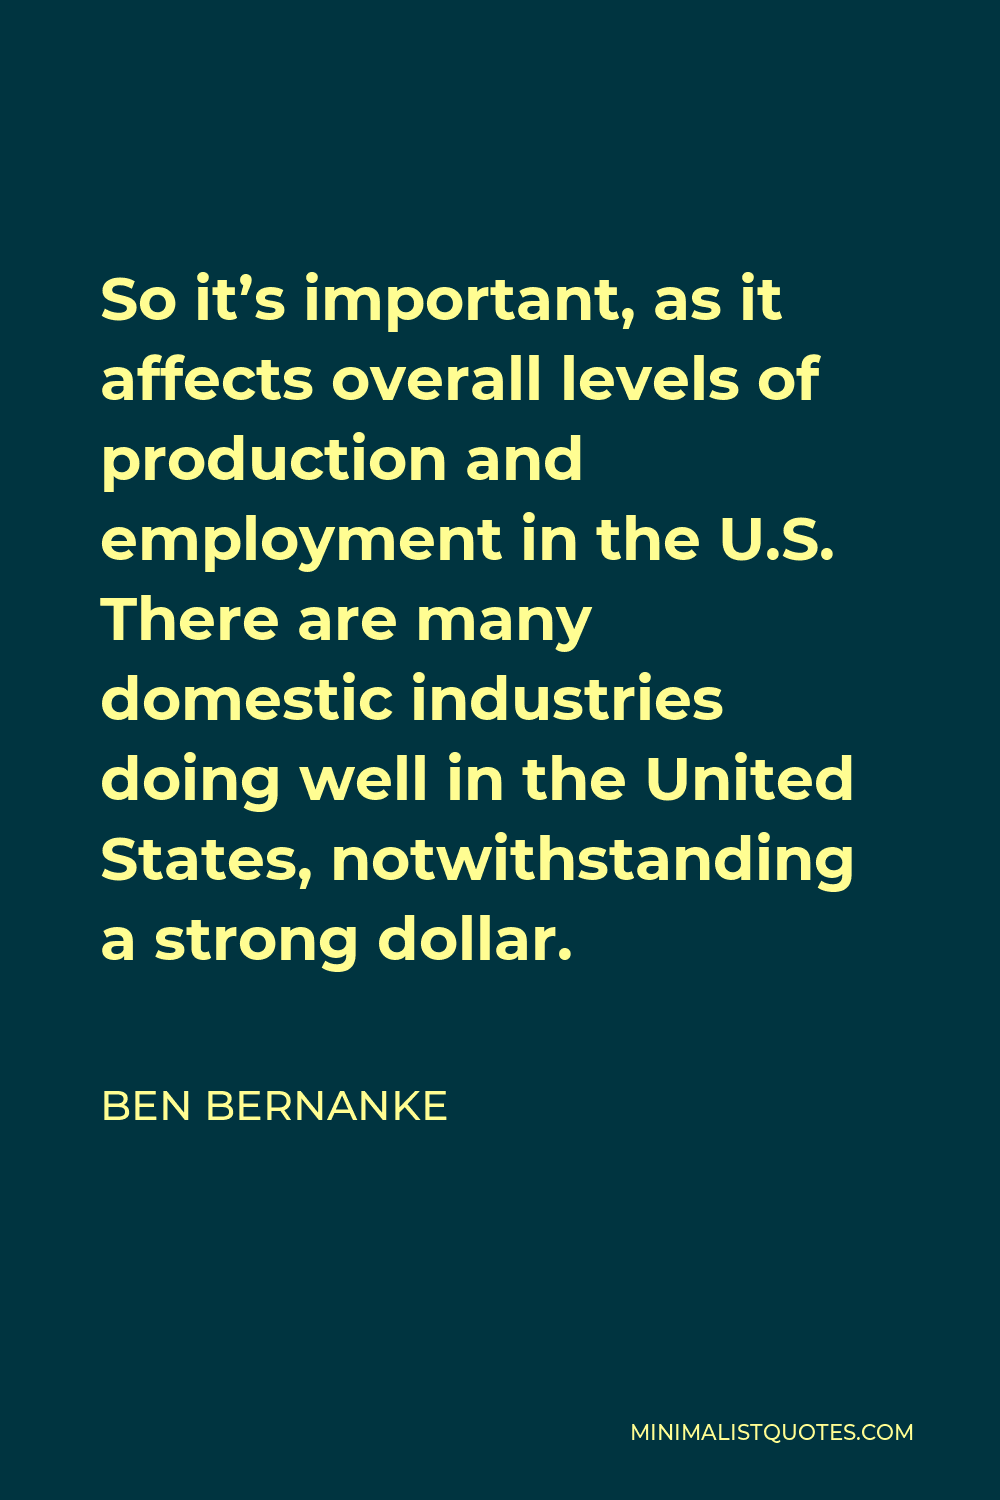 Ben Bernanke Quote - So it’s important, as it affects overall levels of production and employment in the U.S. There are many domestic industries doing well in the United States, notwithstanding a strong dollar.